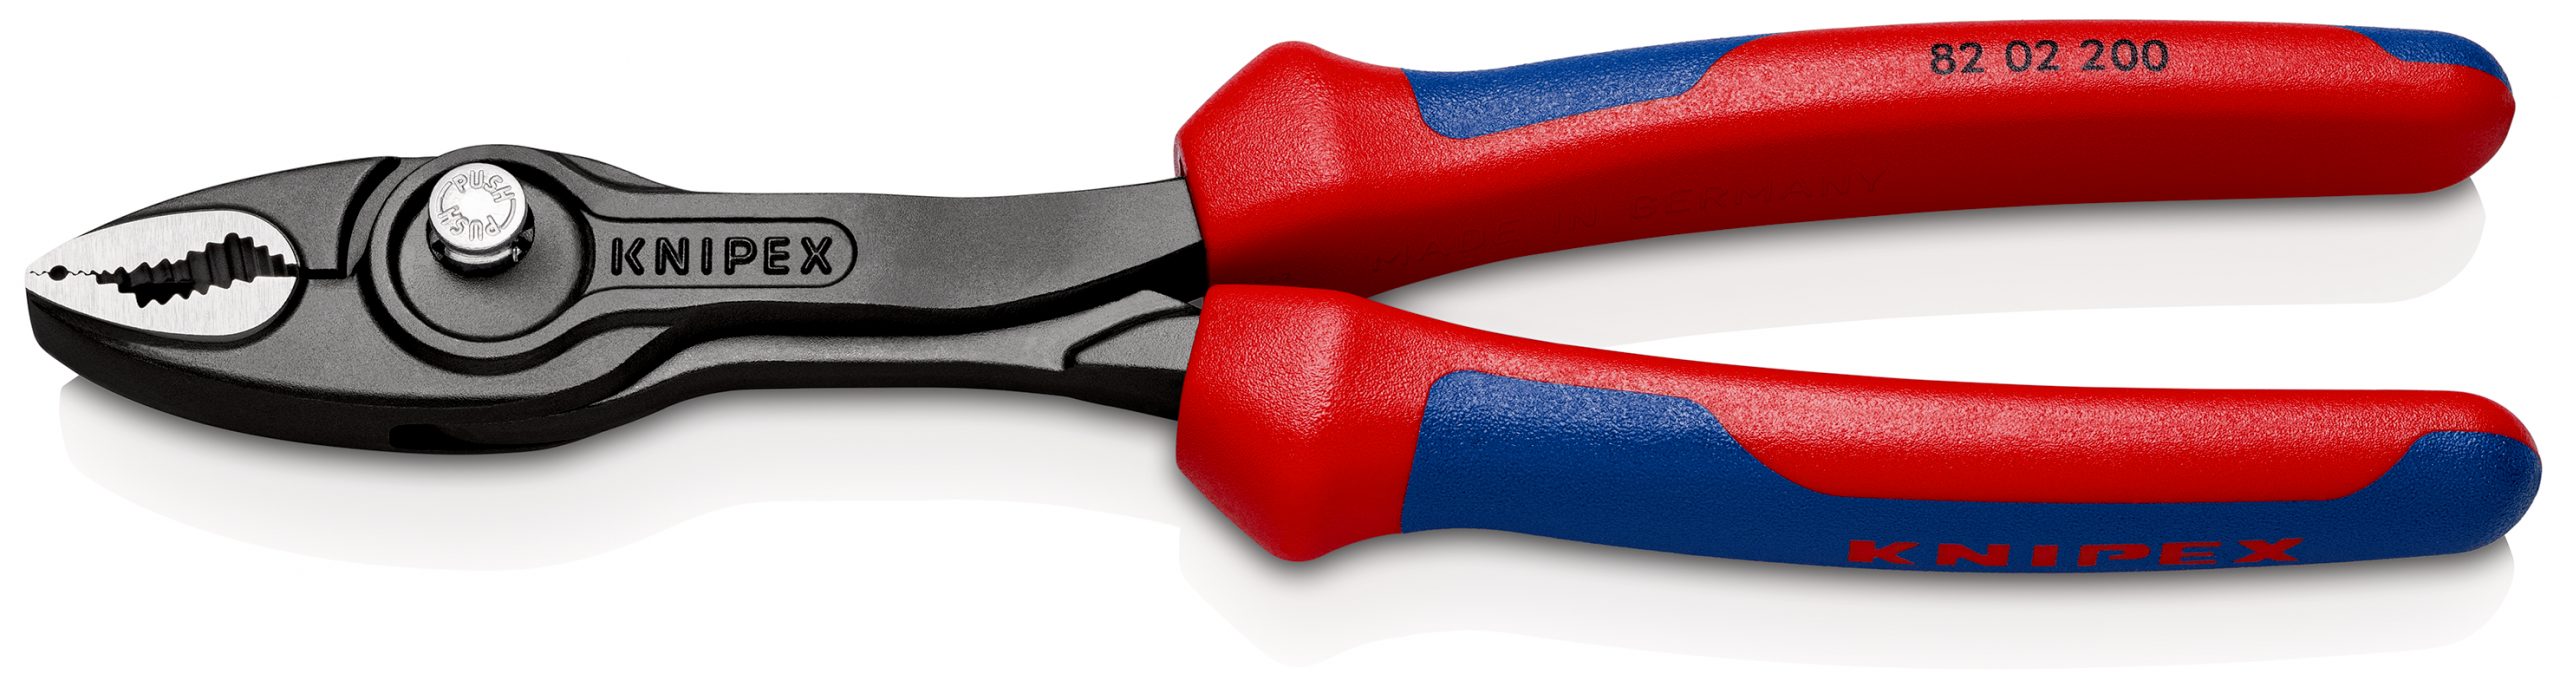 Knipex 82 02 200 TwinGrip Slip Joint Pliers With Multi-Component